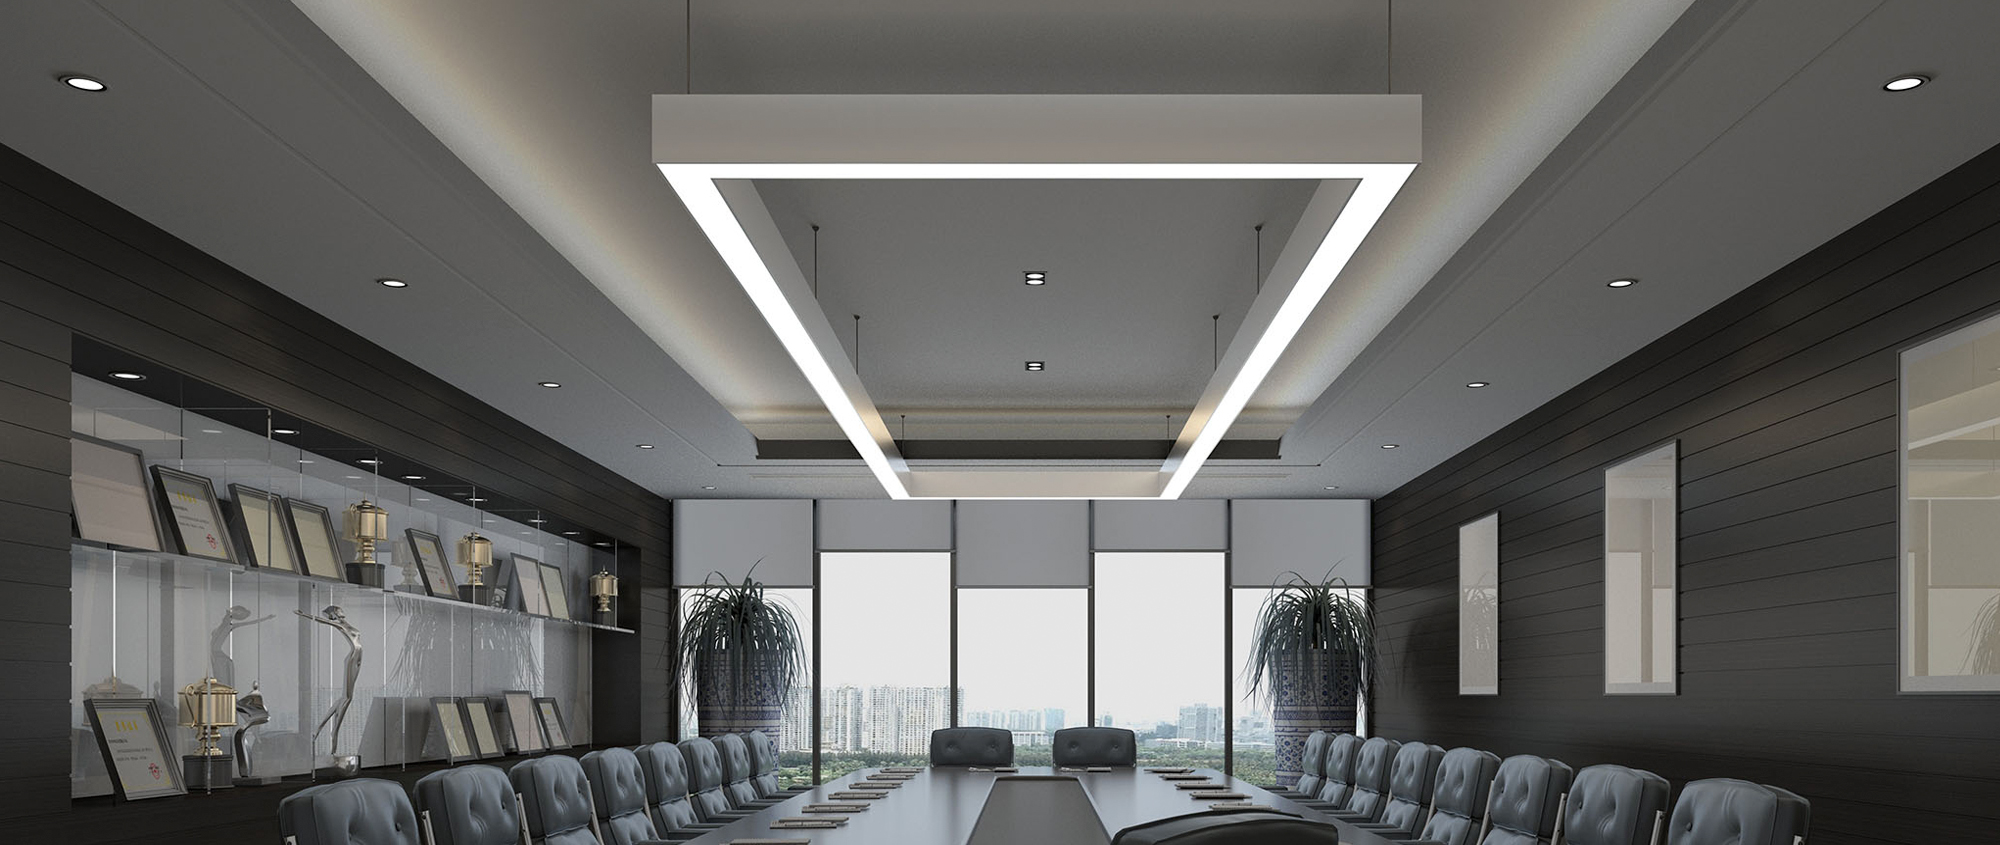 Recessed Linear Light Options